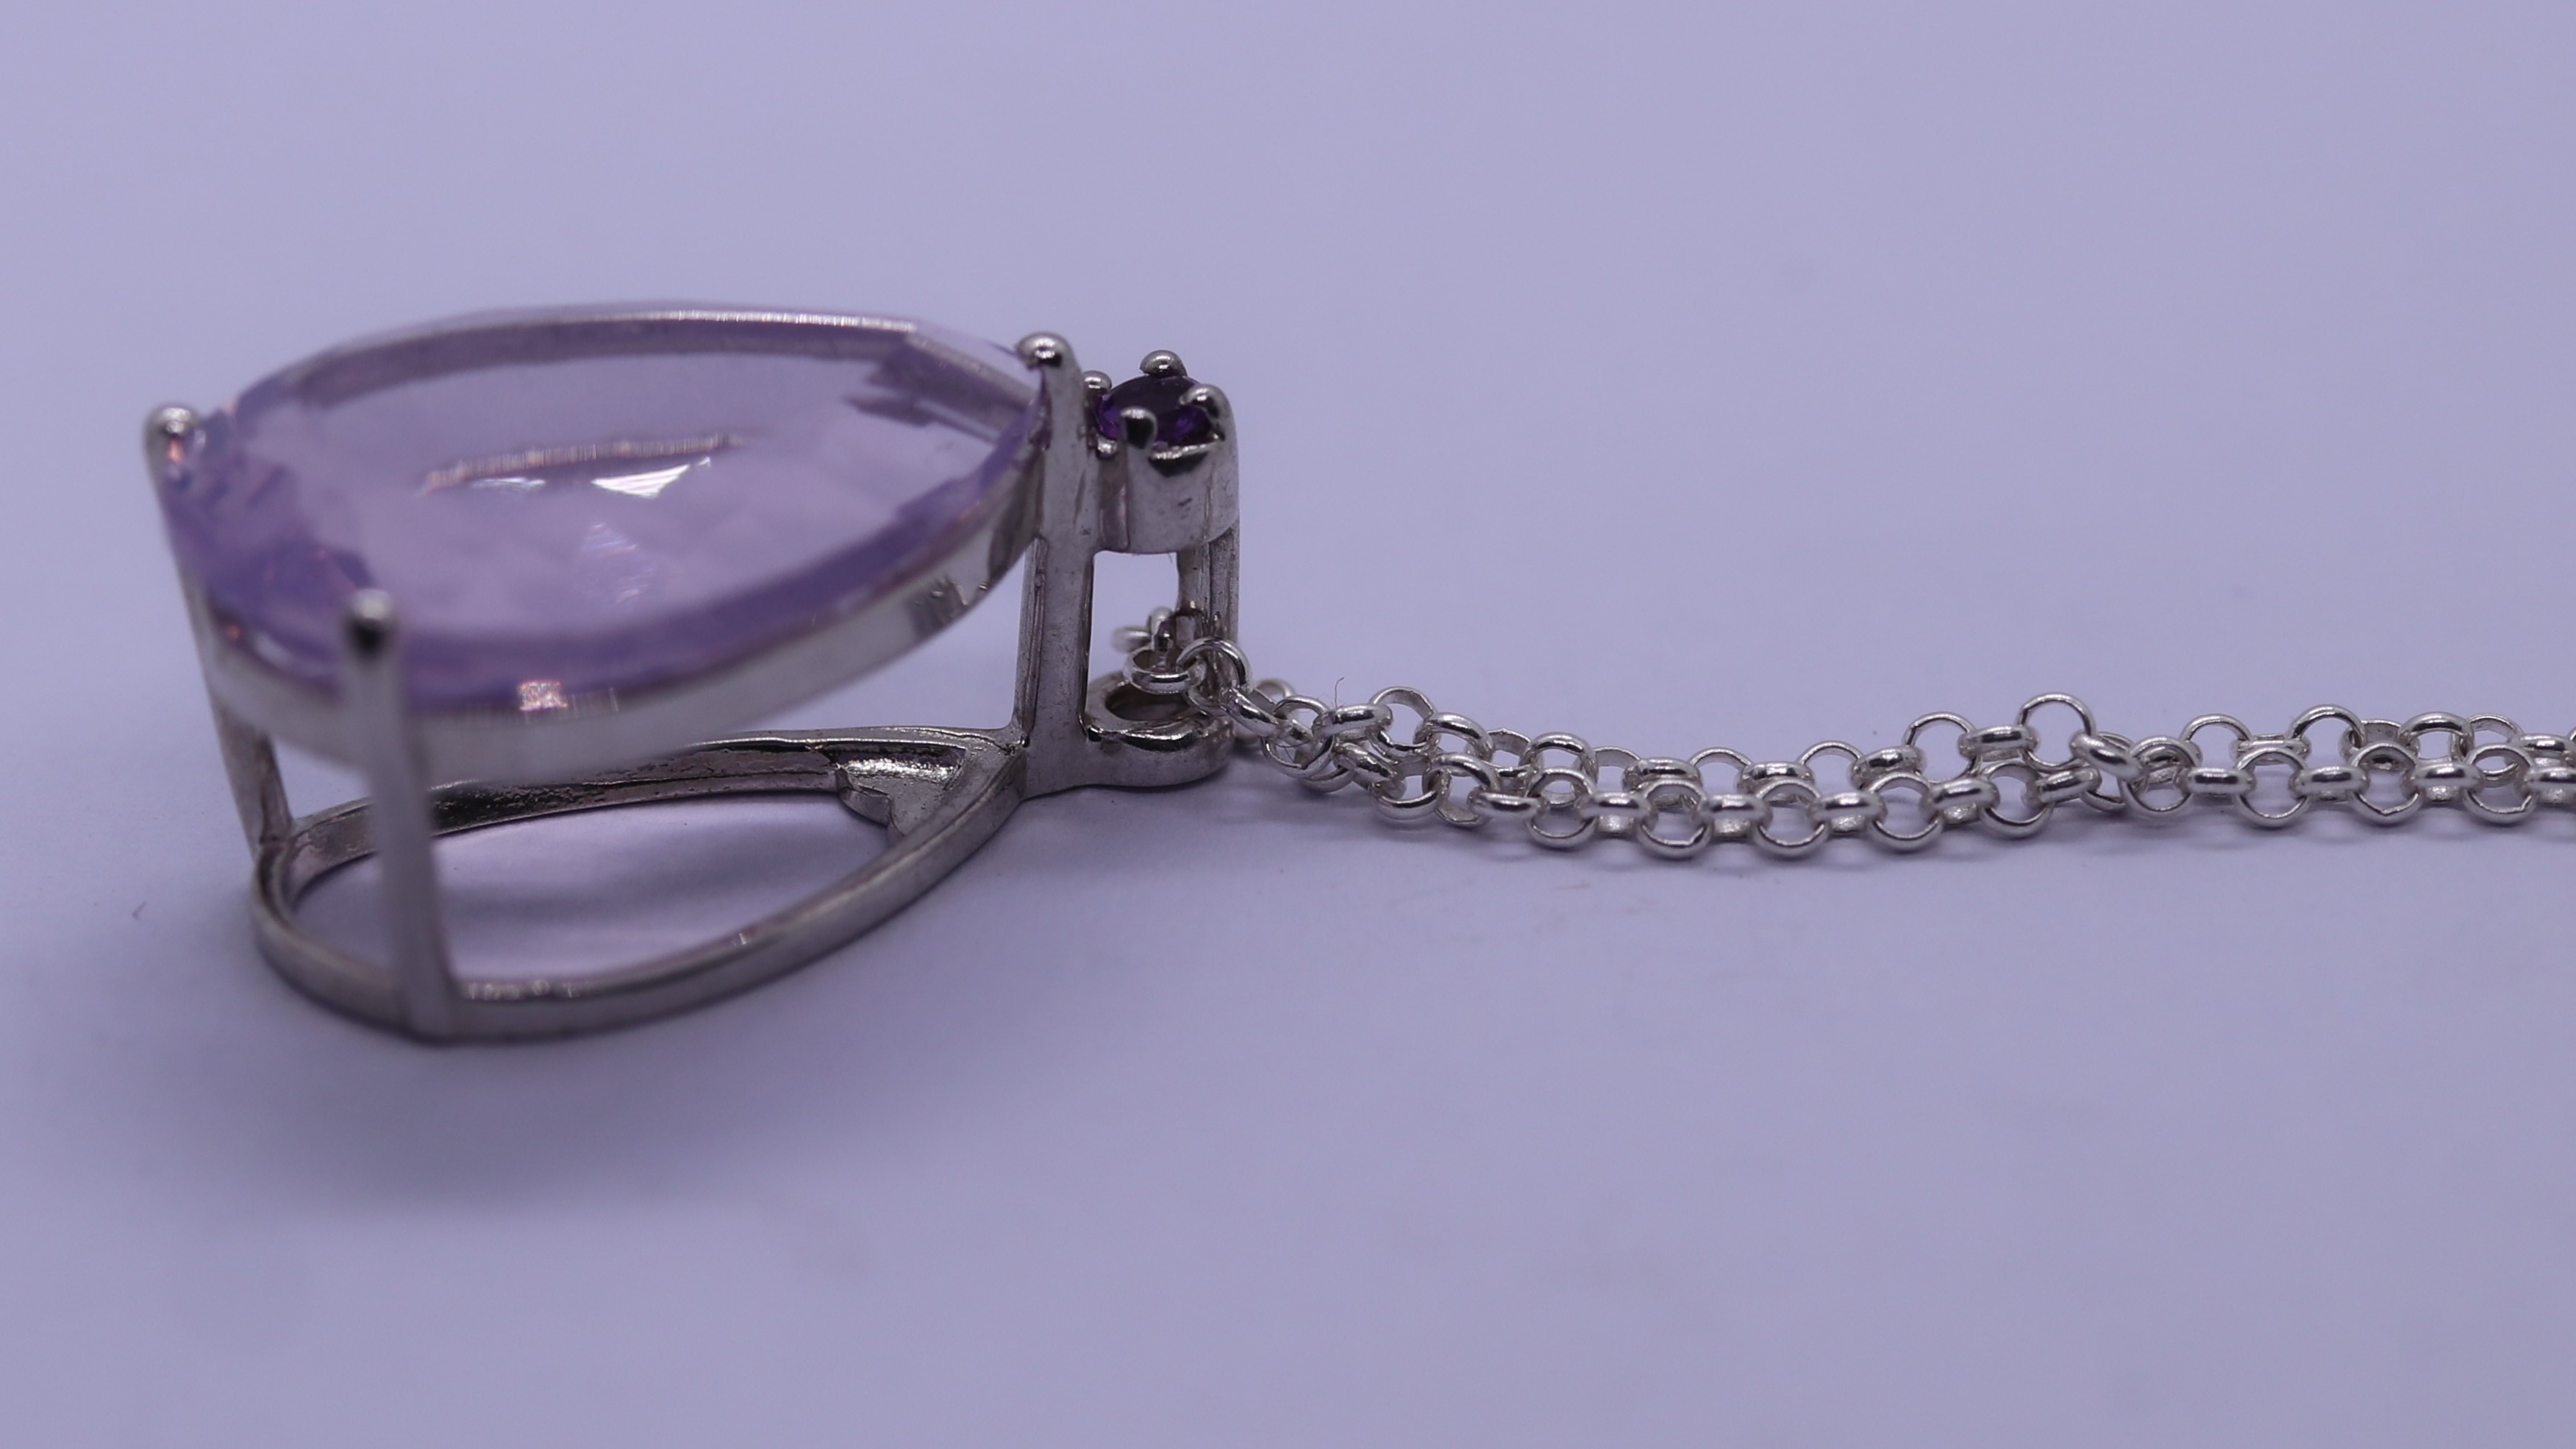 Silver amethyst set pendent on chain - Image 3 of 3